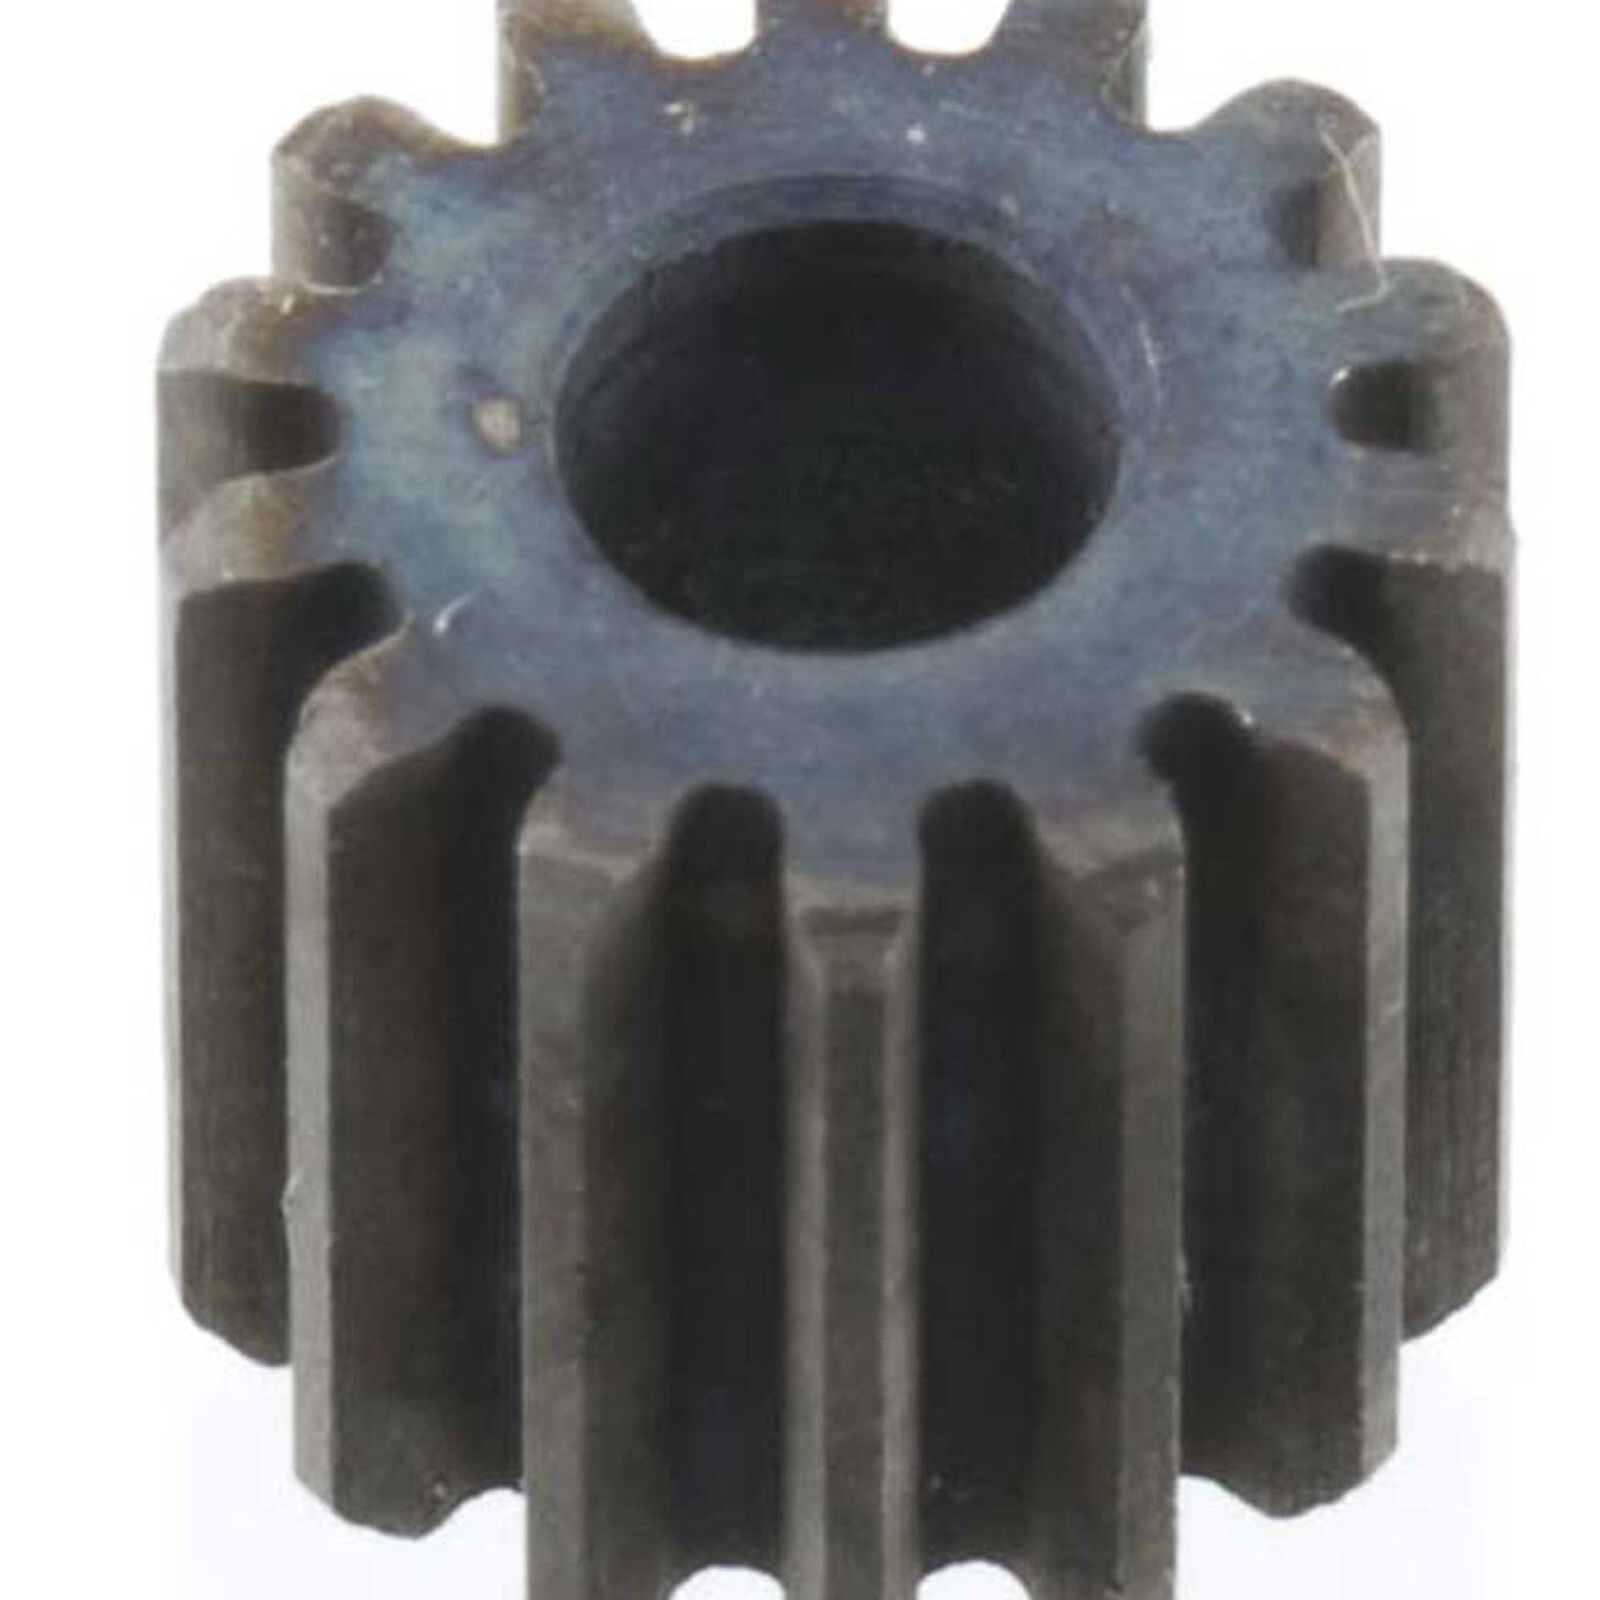 3.17mm Pinion Gear For Planetary Gearbox 2